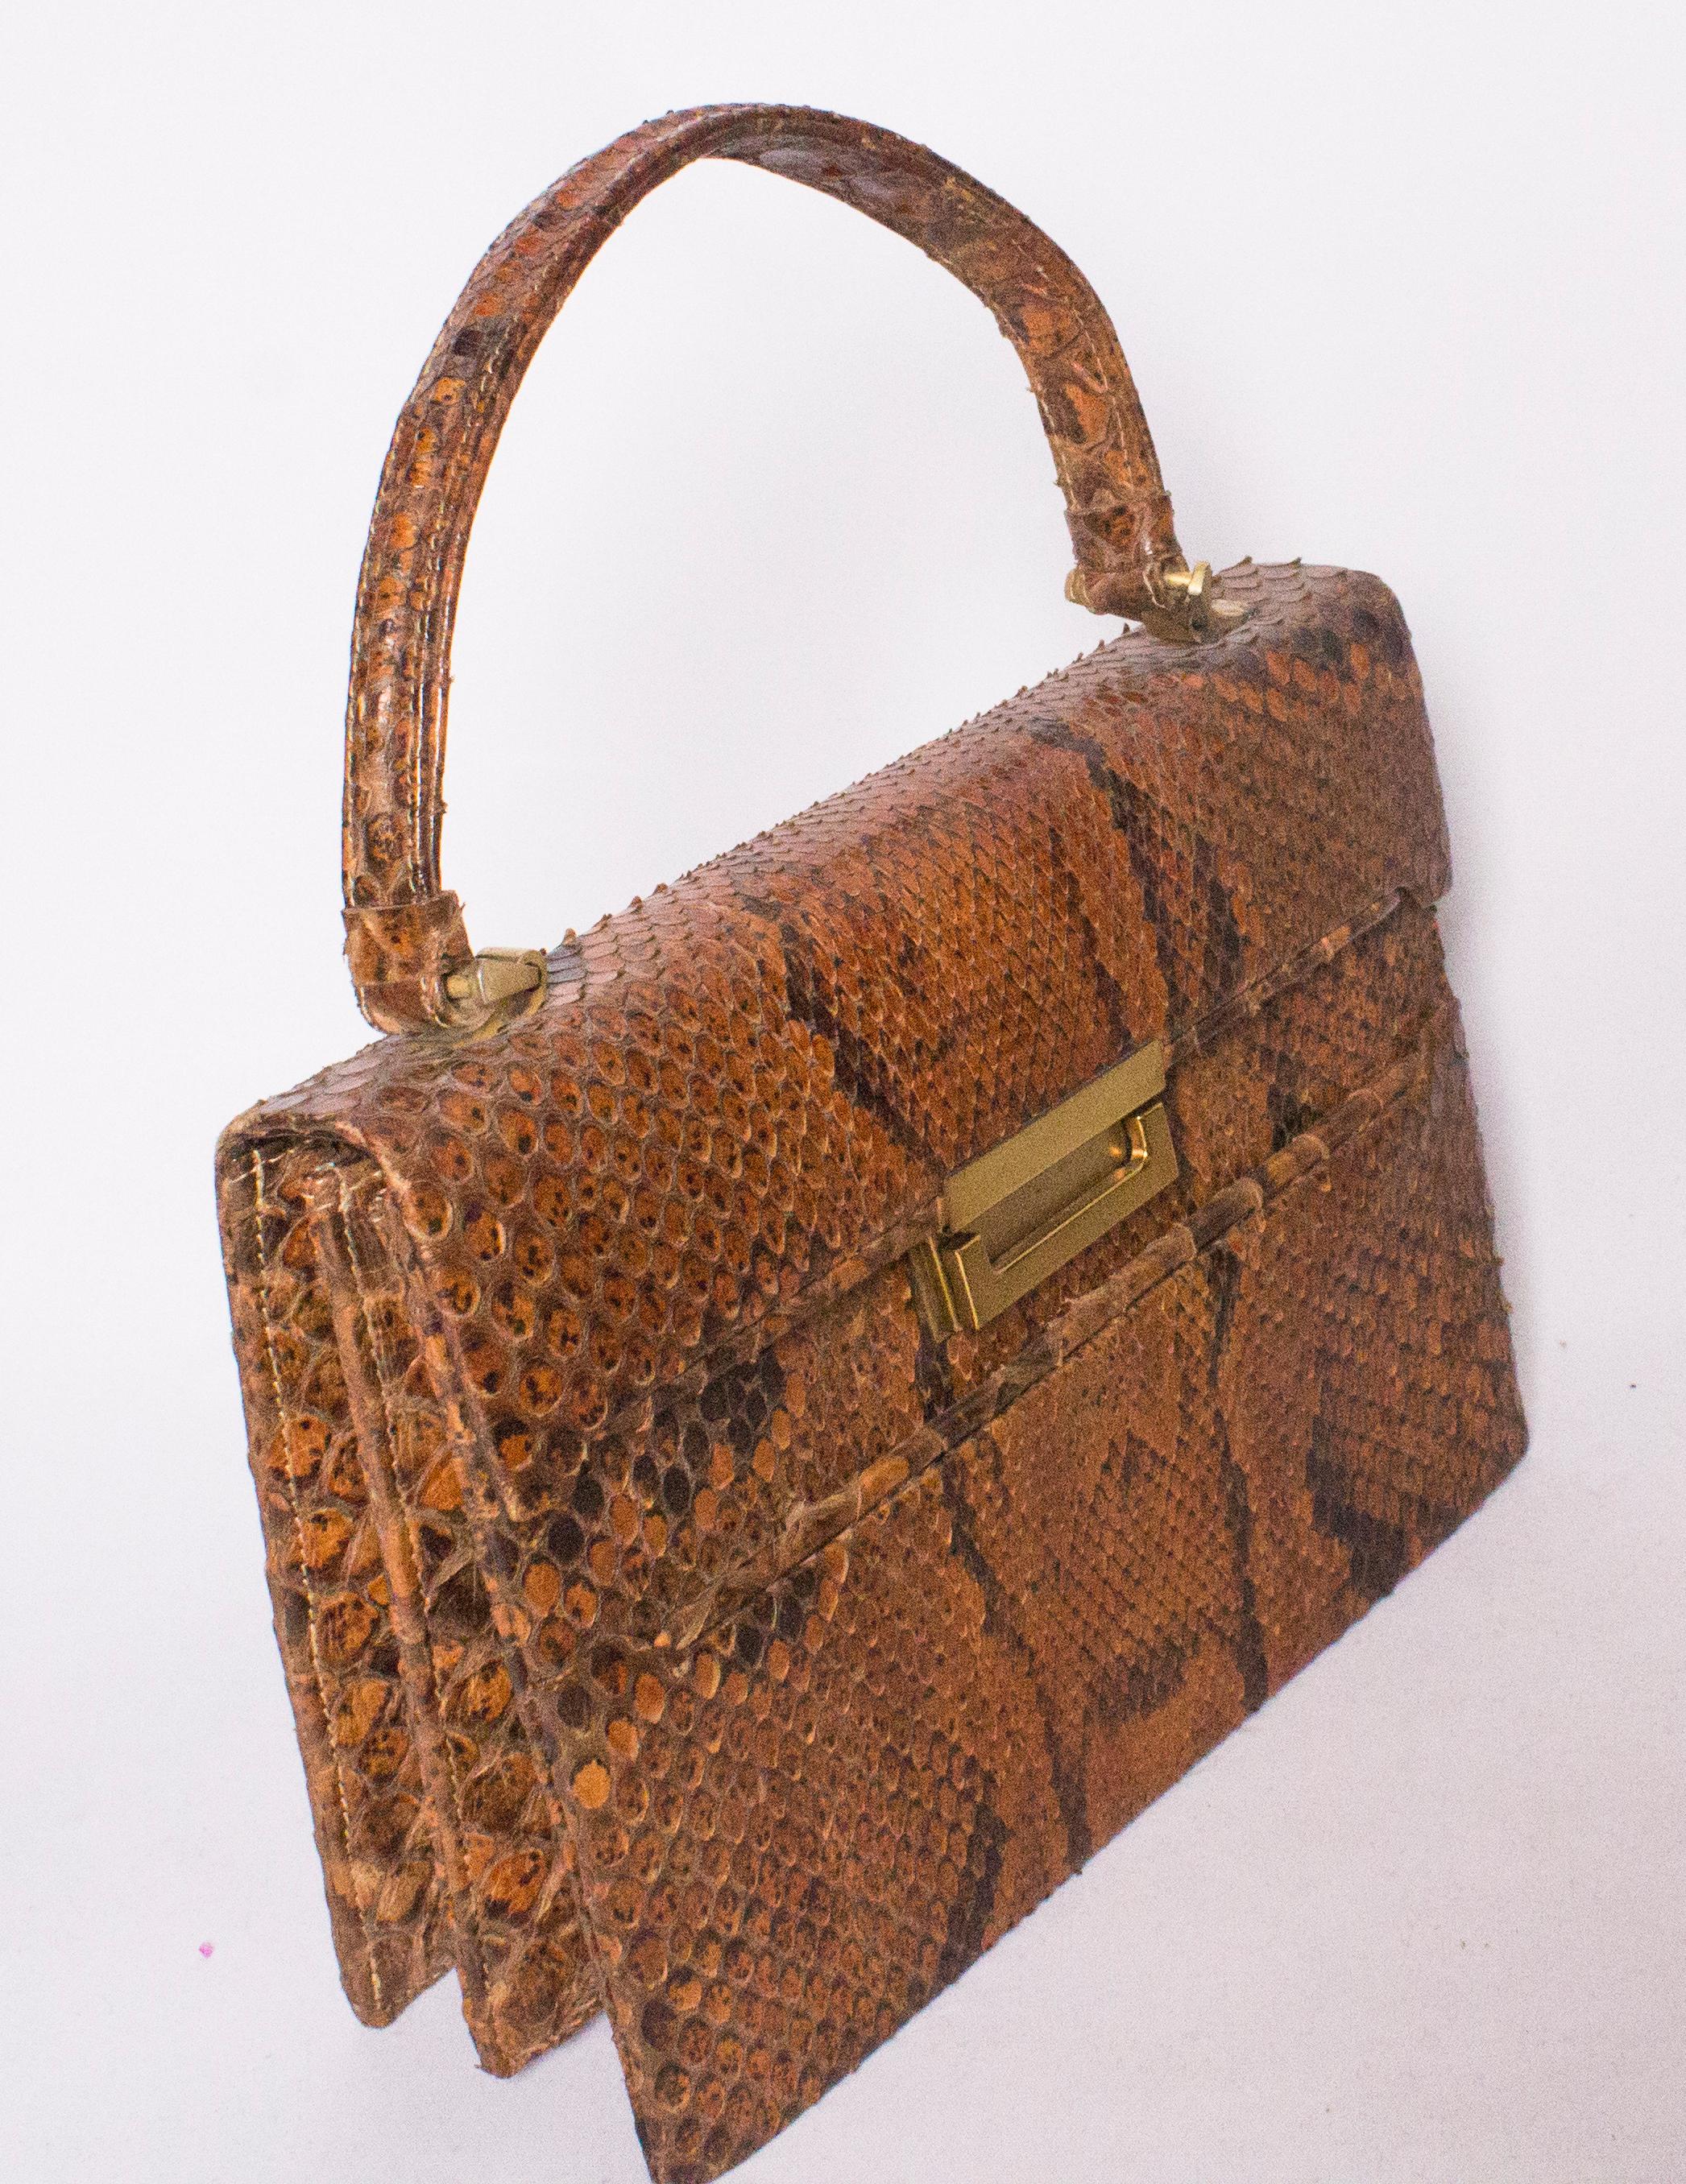 A chic tophandle snakeskin bag in tan and dark brown. The bag has a flap front with clasp.  There is a pouch pocket at the front, and internally there are two compartments each with a pouch pocket.
Height 7'', width 9'', depth 2 1/2''